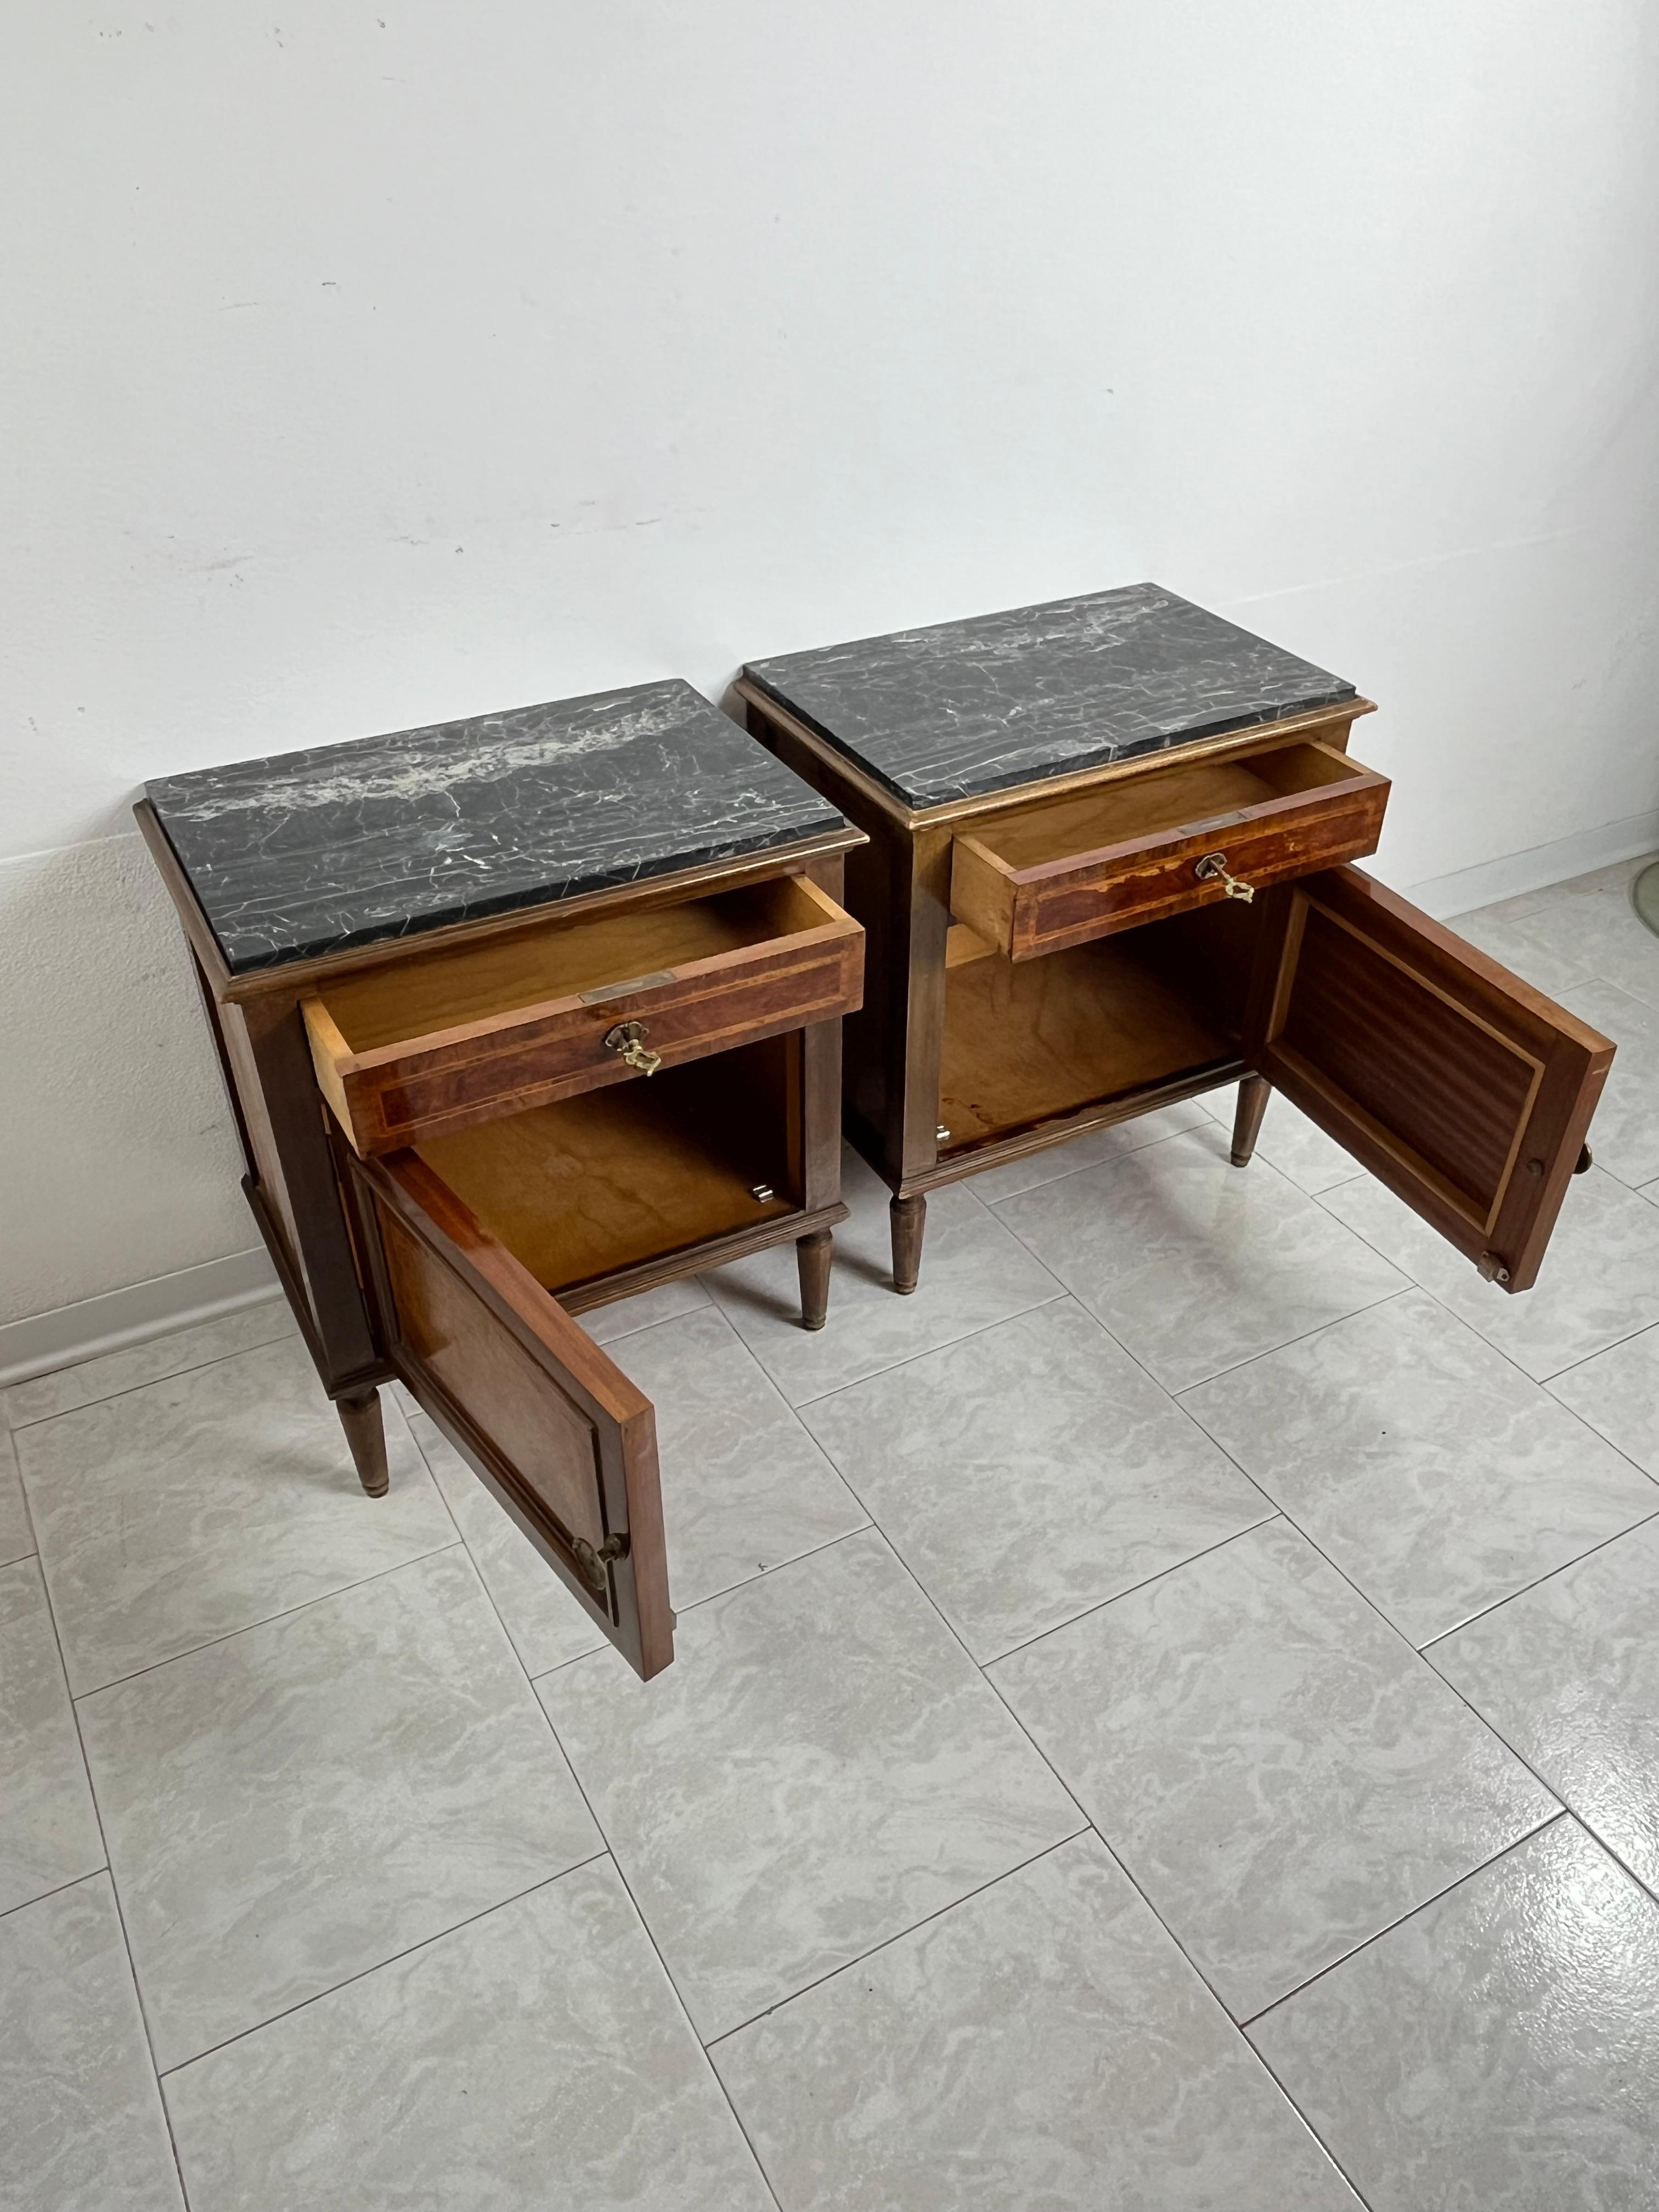 Set of 2 Mid-Century Italian Bedside Tables in Wood and Fine Marble Top 1960s For Sale 2